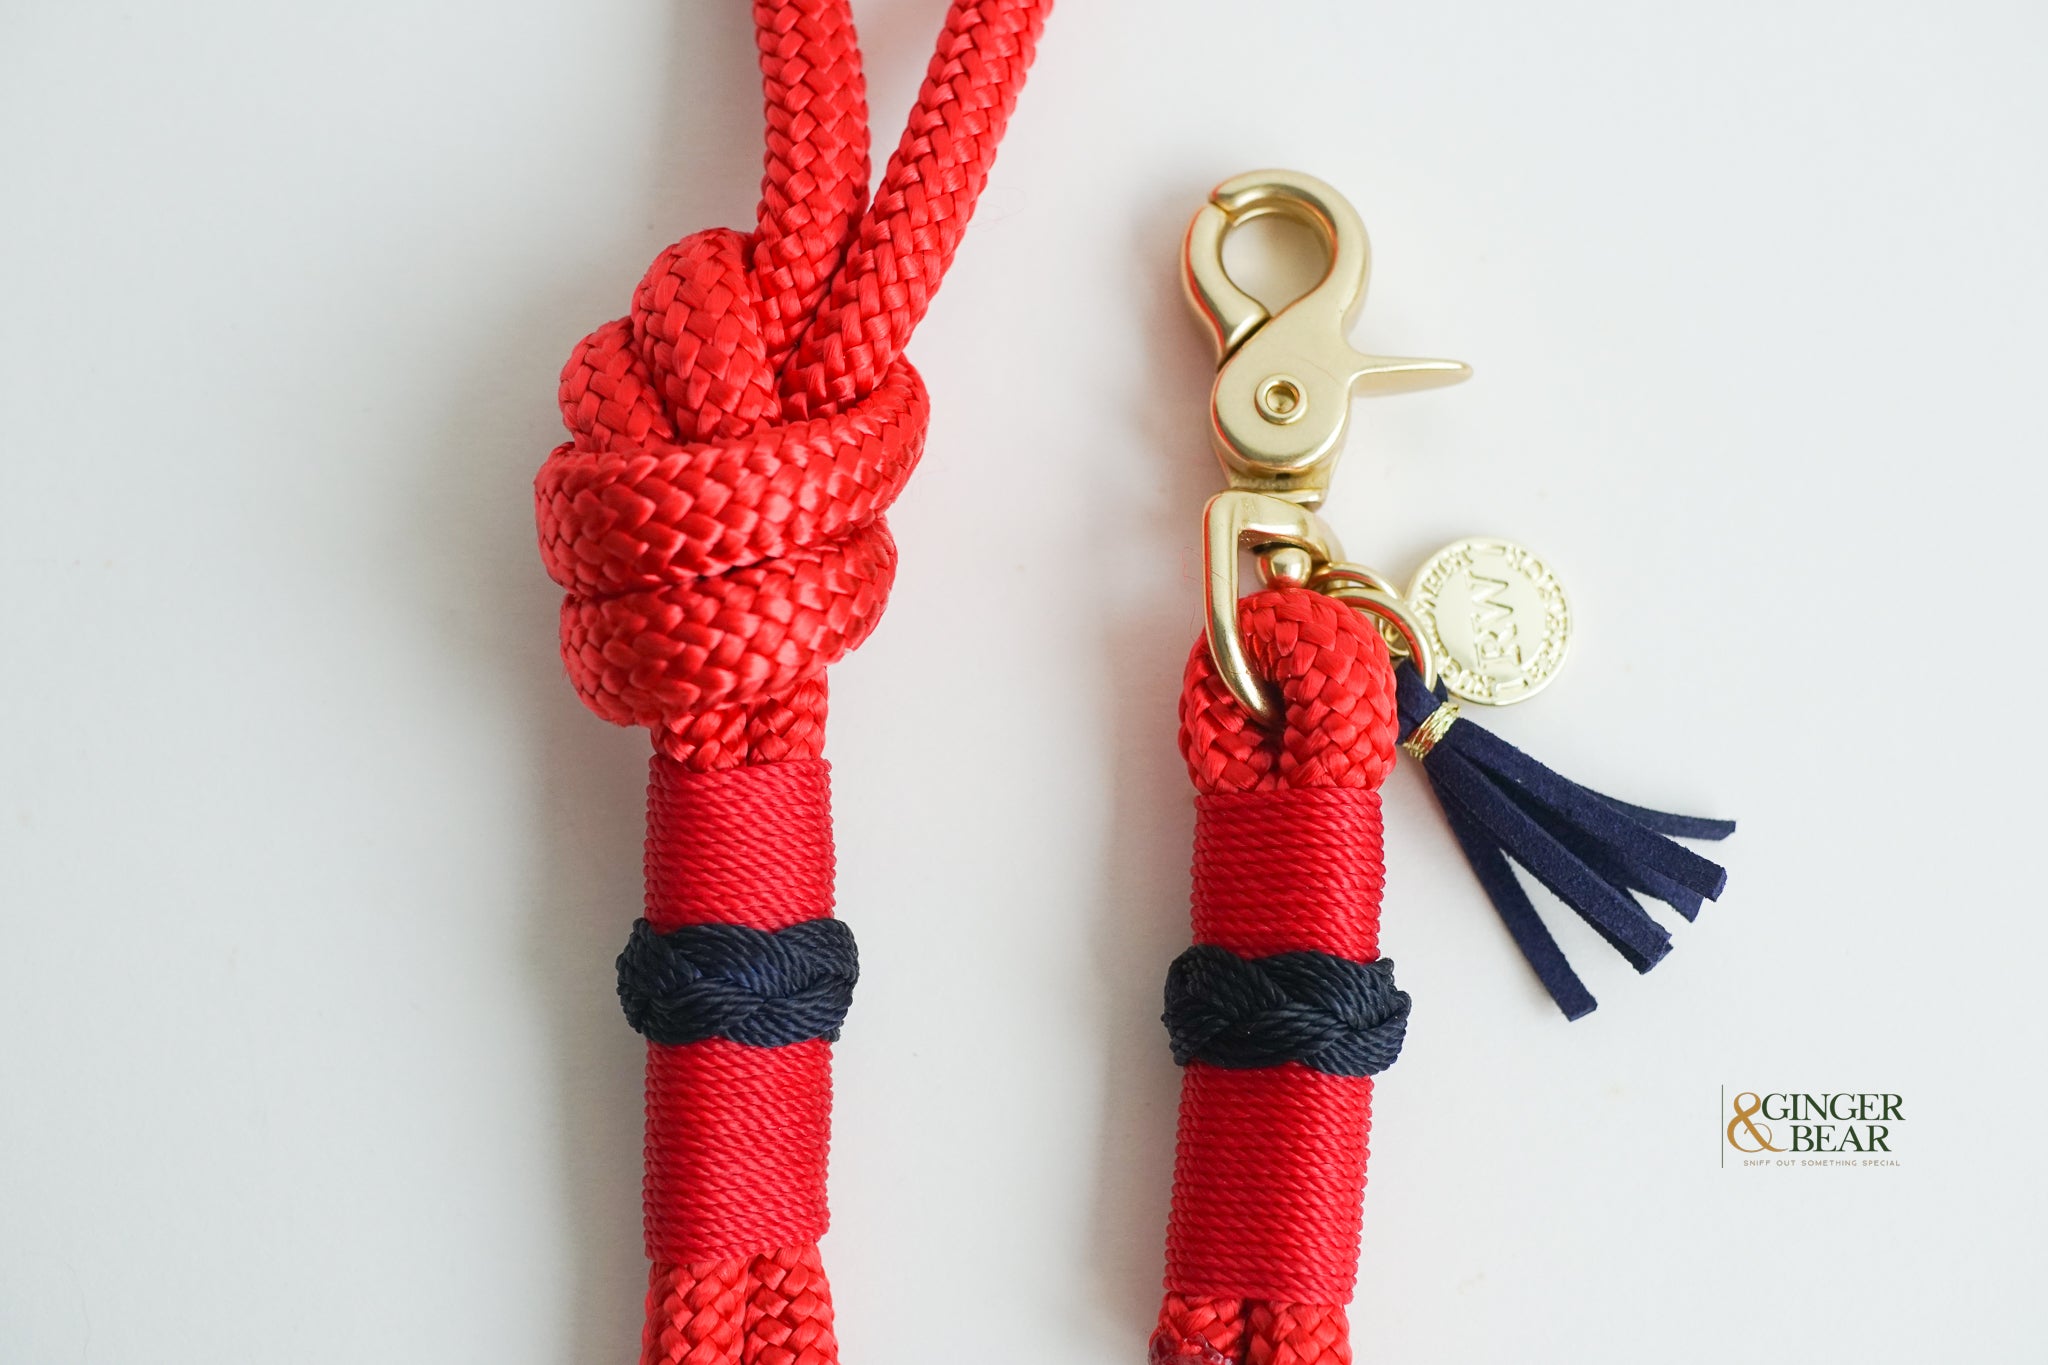 Rugged Hudson Dog Leash: Knotted Navy on Red rope